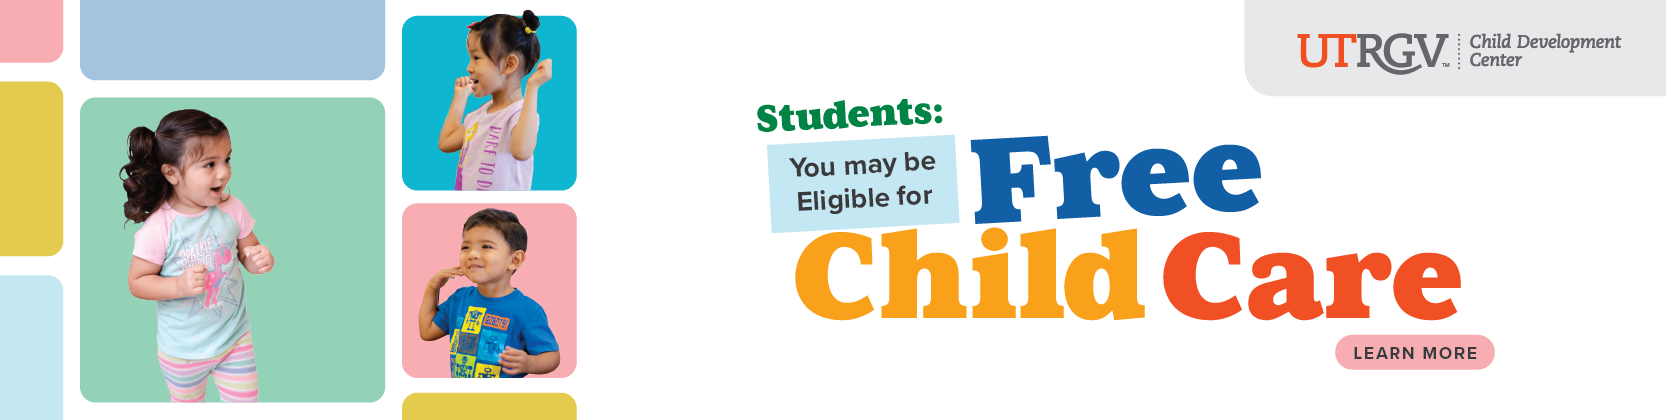 Child Development Center can provide free child care for utrgv students and has affordable rates for all campus staff and faculty. Page Banner 